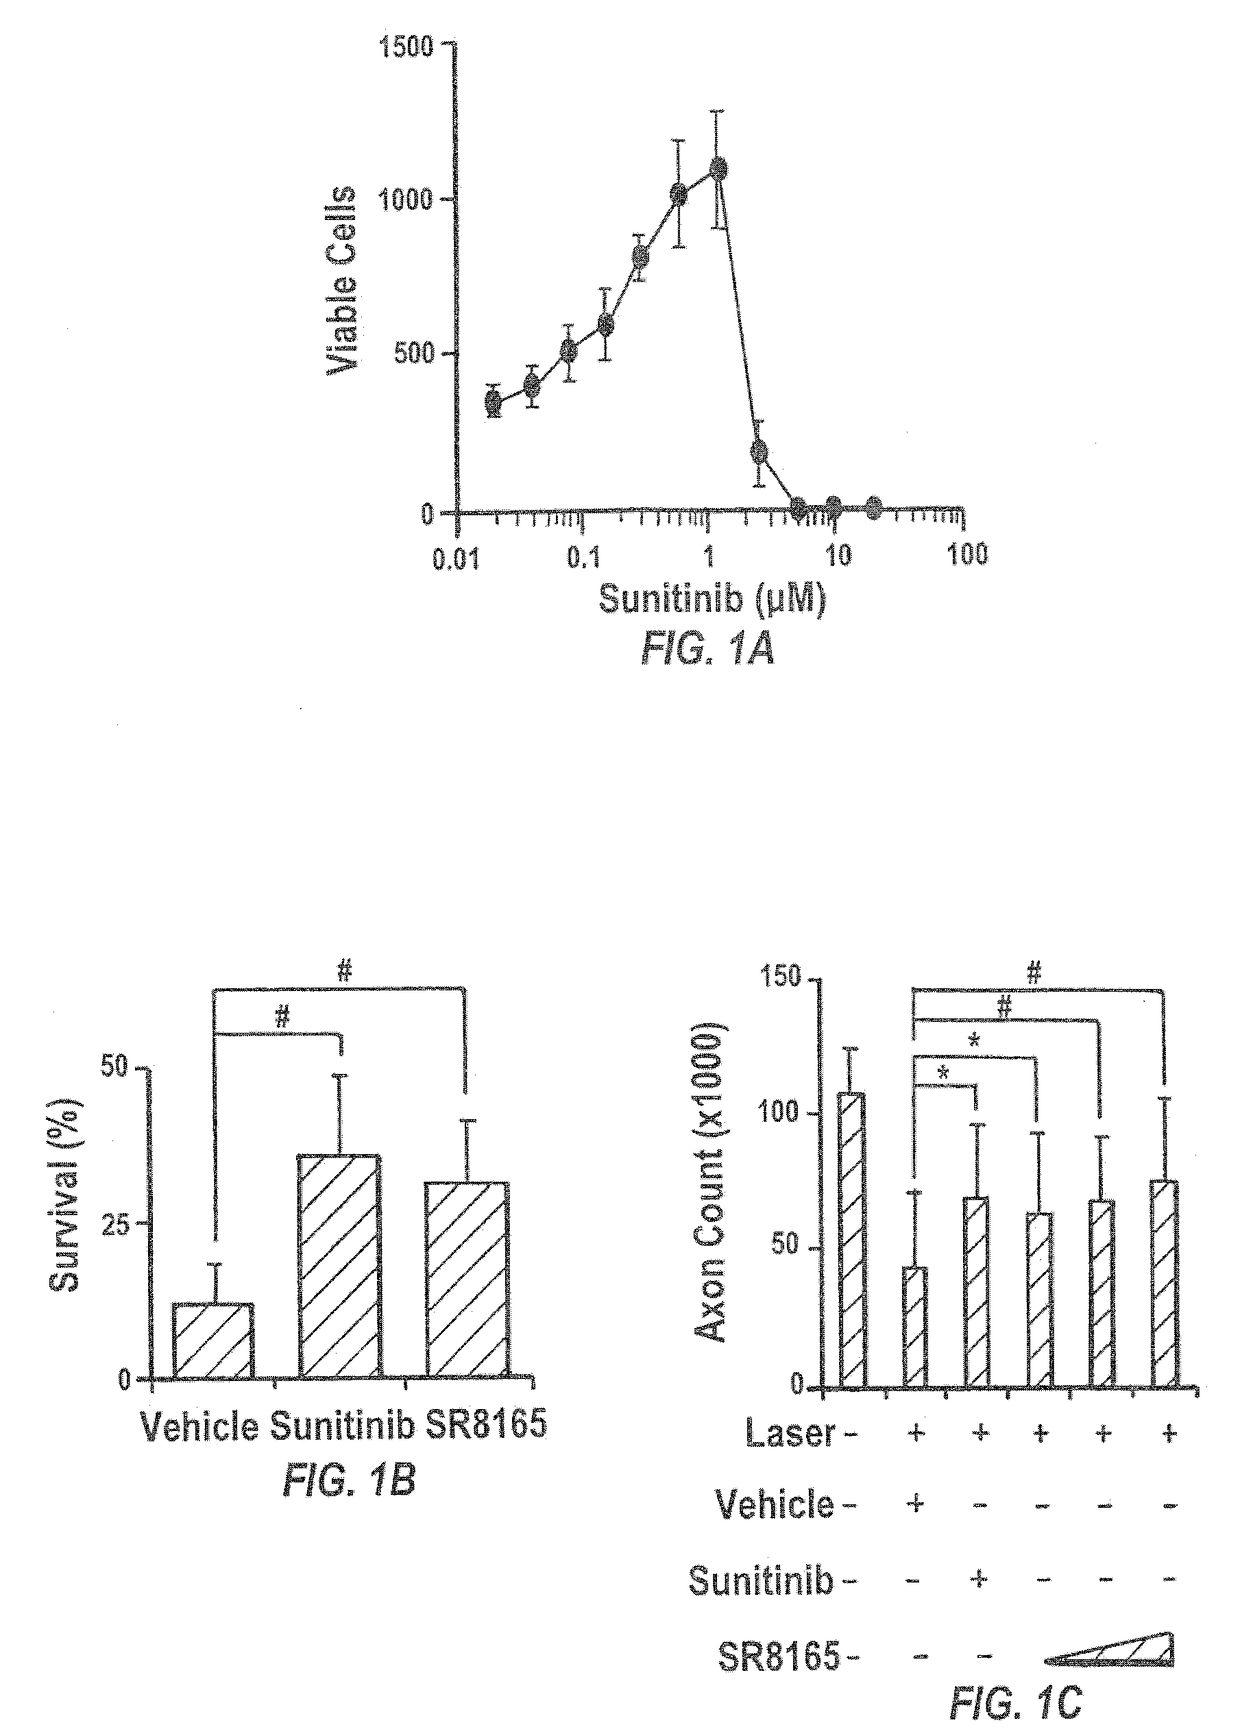 Sunitinib formulations and methods for use thereof in treatment of glaucoma